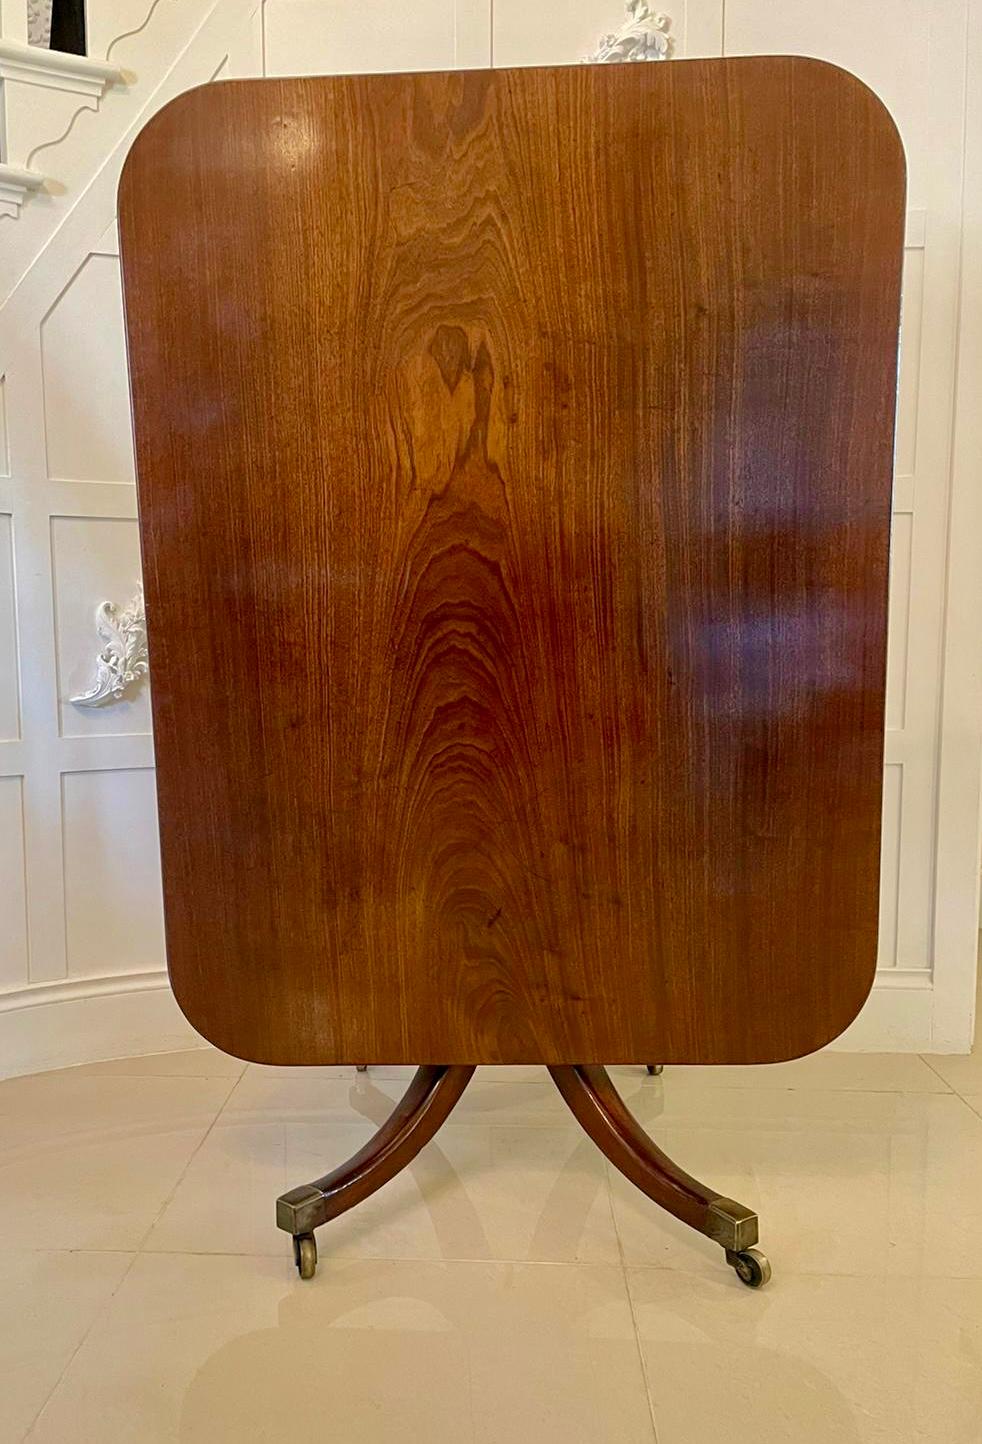 Quality antique regency mahogany breakfast table having a beautiful quality mahogany tilting top supported on a stunning turned ring column and raised on sabre legs with original brass feet and castors.

An impressive handsome example having a very